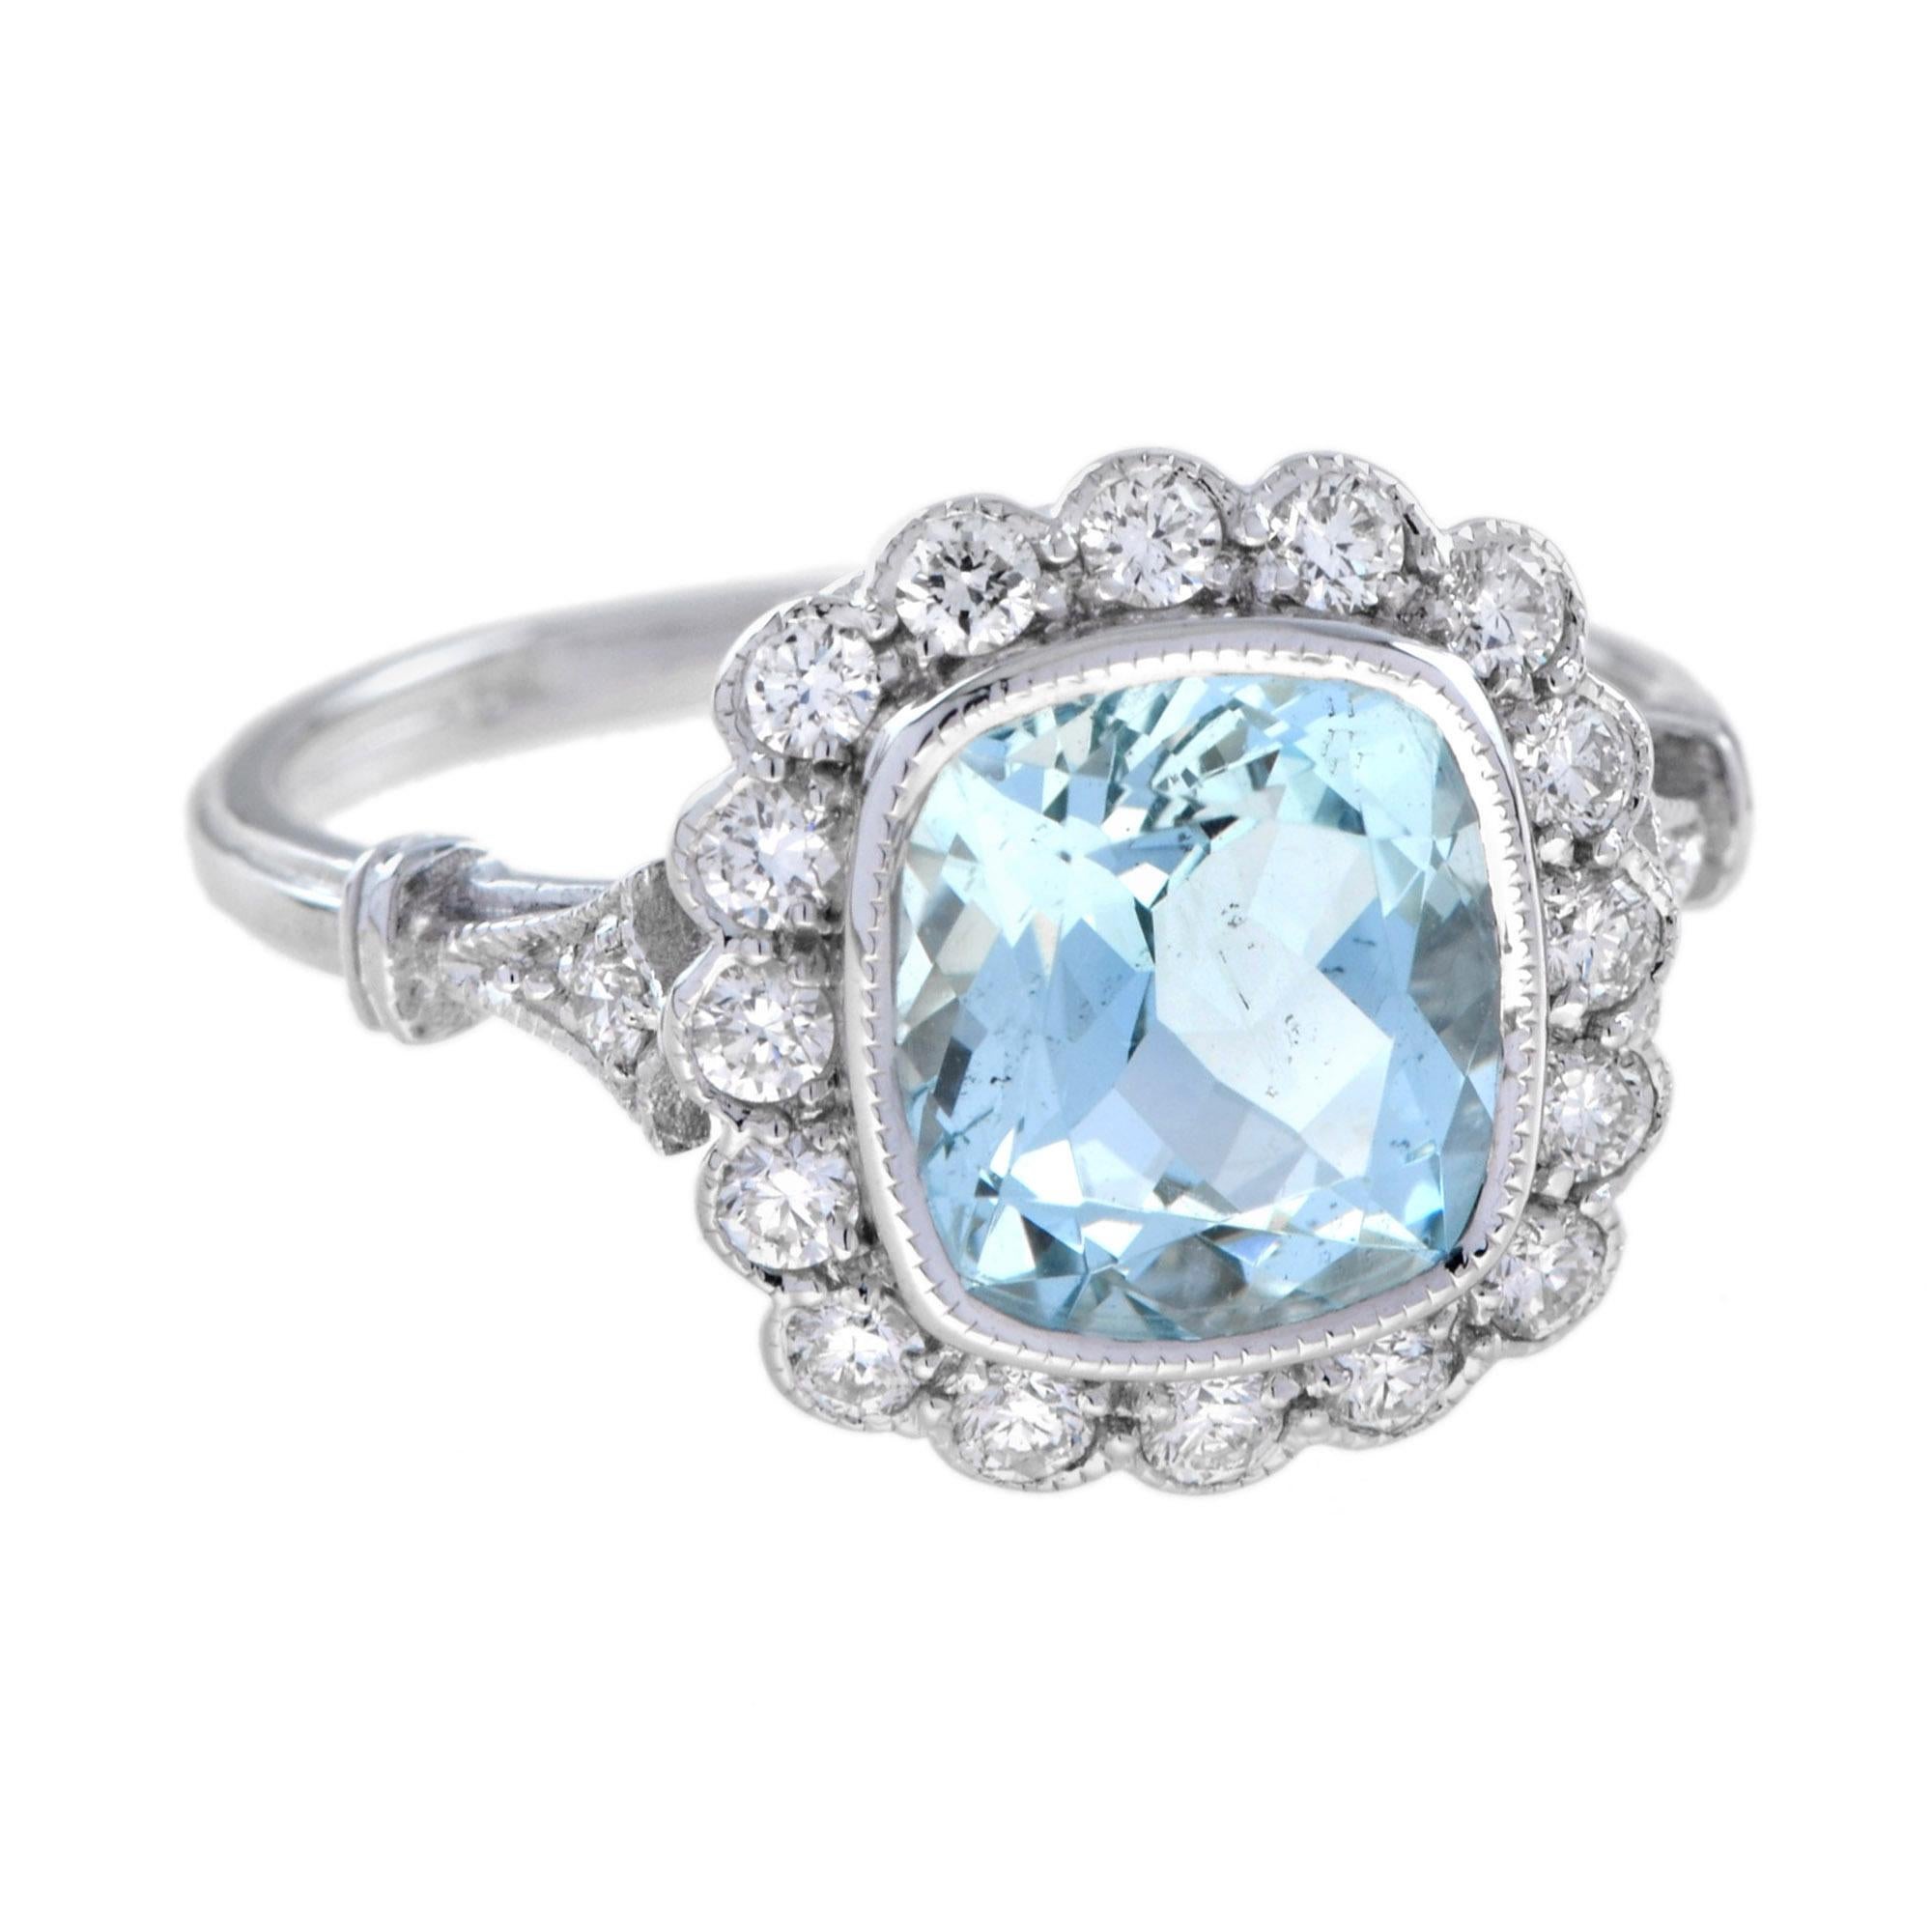 For Sale:  Cushion Aquamarine and Diamond Halo Ring in 18K White Gold 5